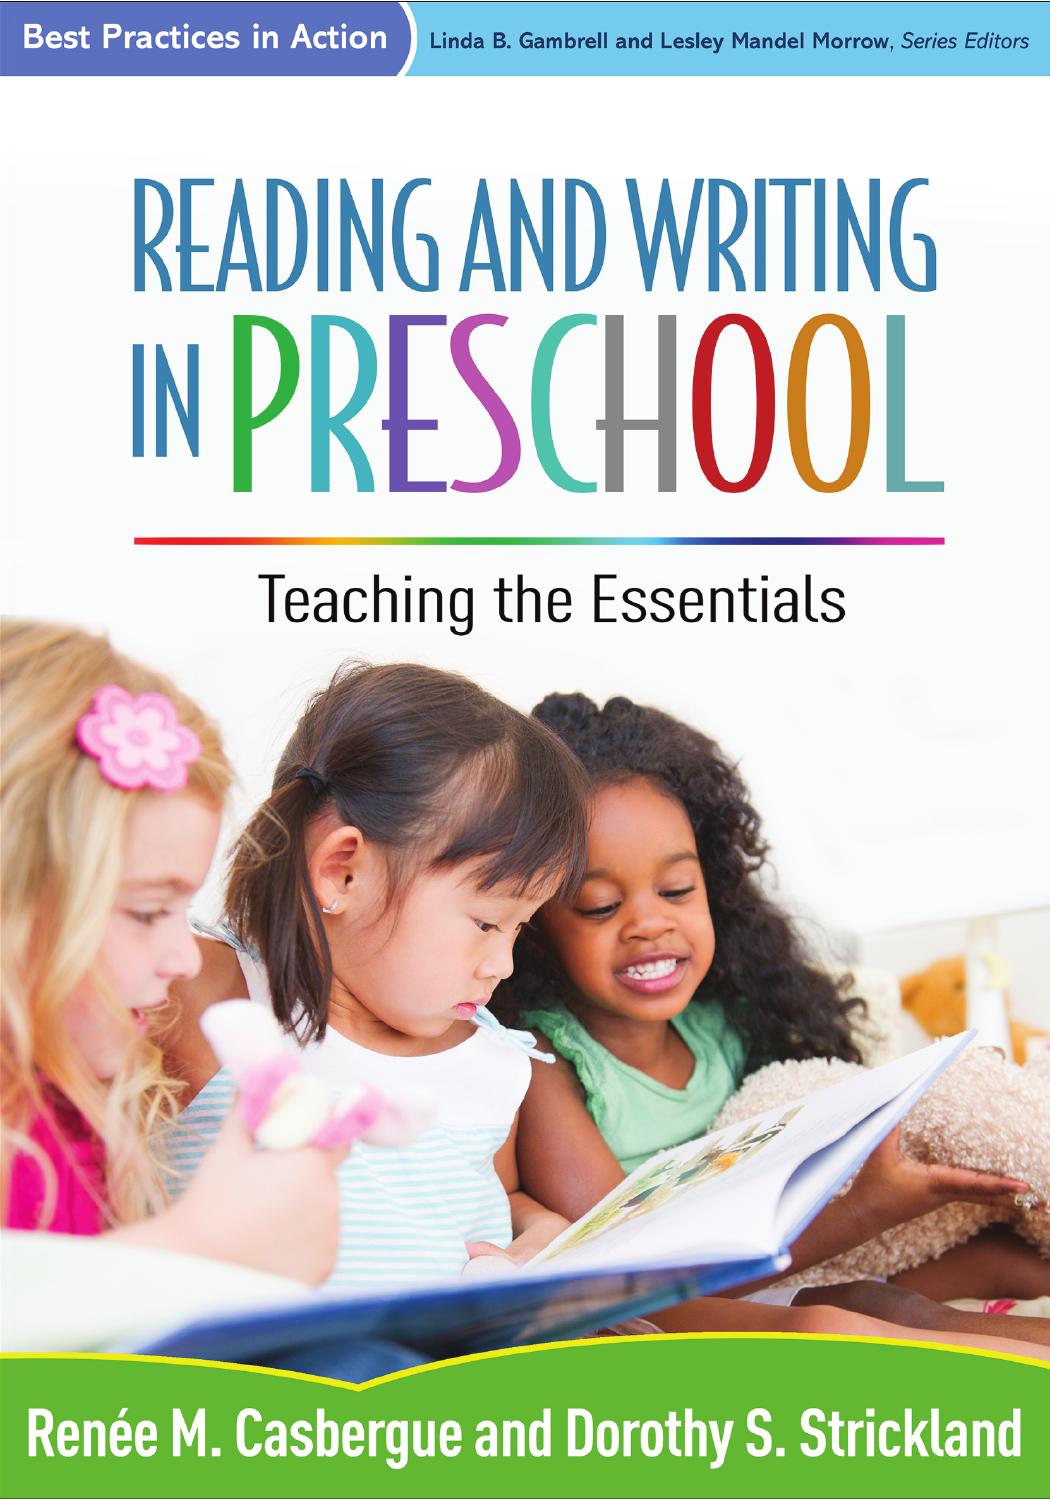 Reading and Writing in Preschool: Teaching the Essentials by Renée M. Casbergue; Dorothy S. Strickland